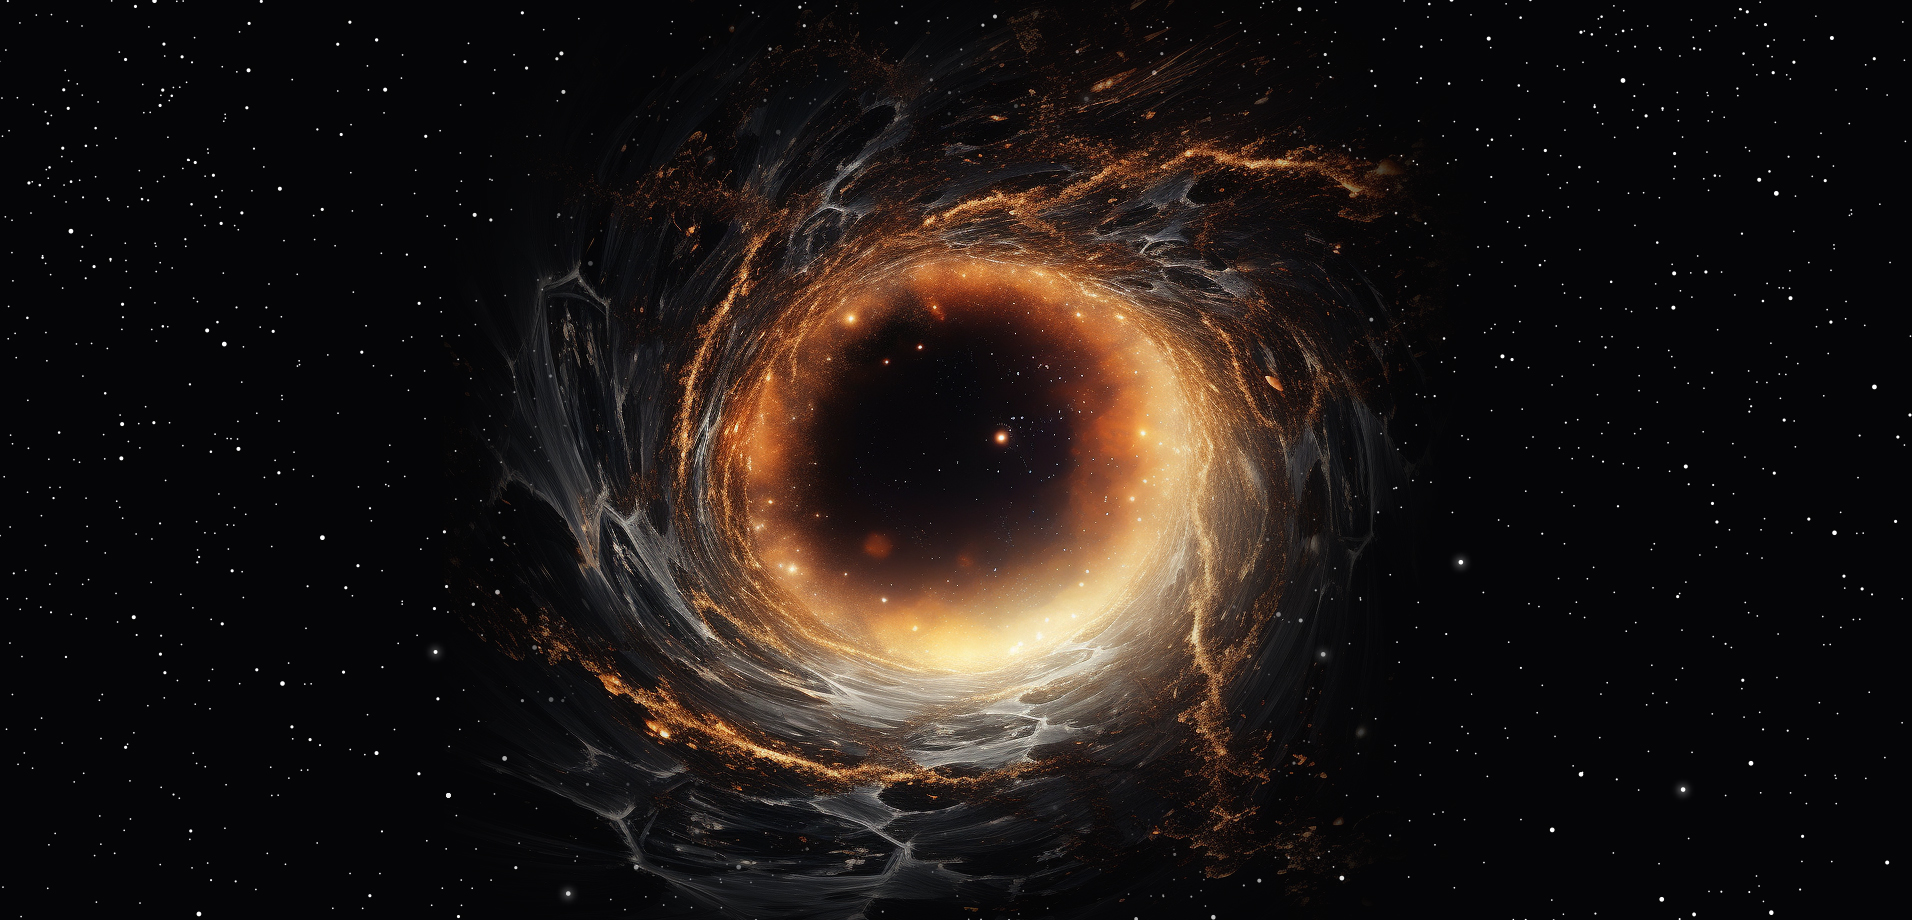 Dark abyss mystery: What’s inside a black hole?